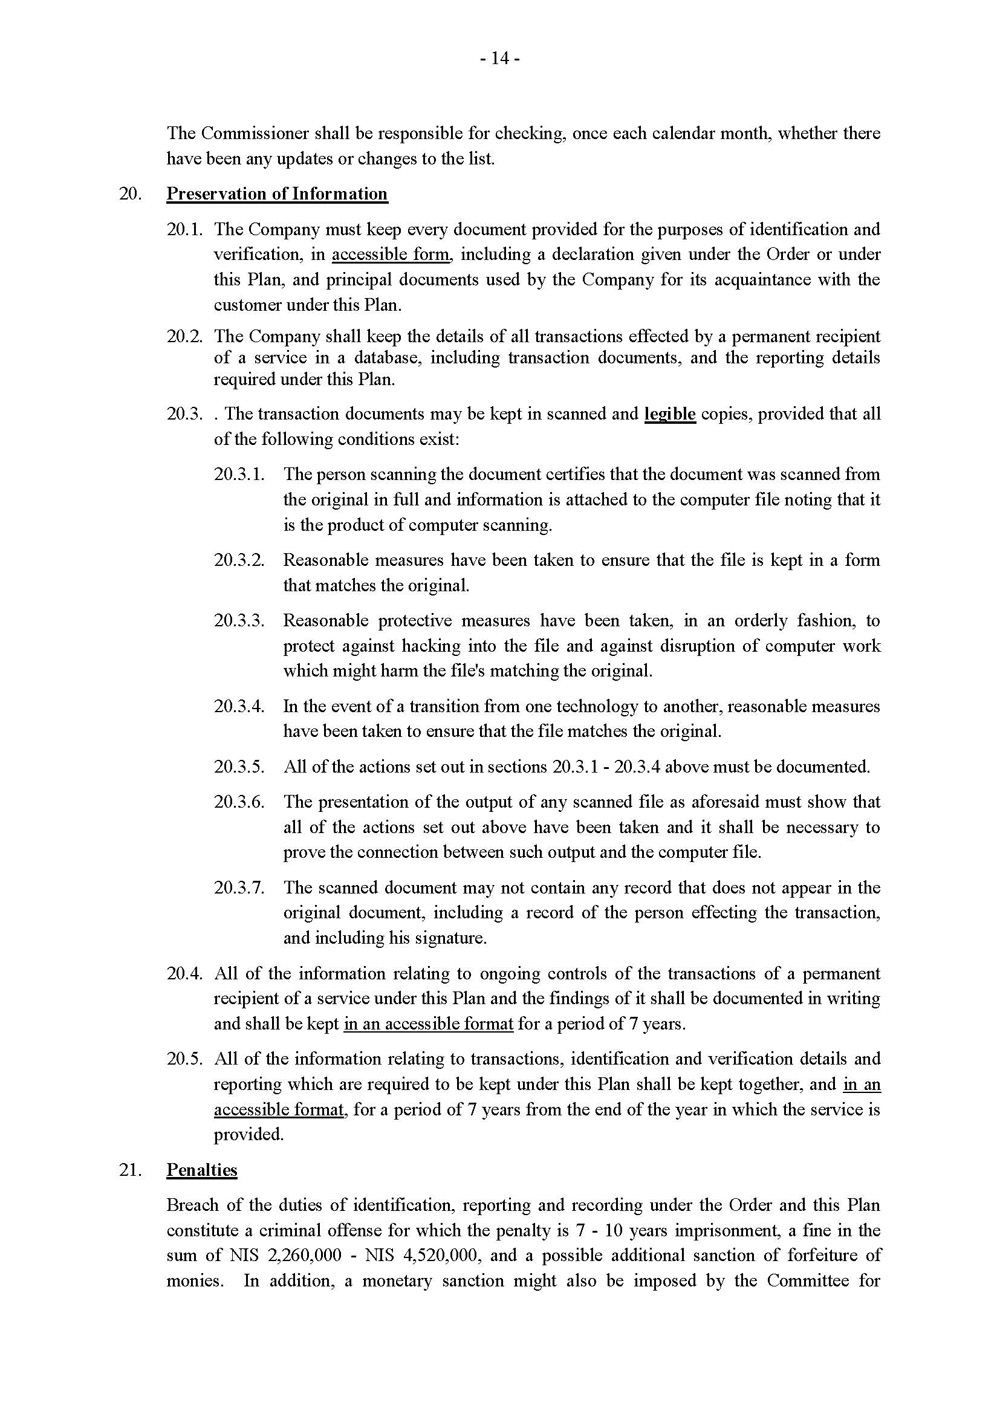 Biteach Compliance Plan - Money Laundering Law English_Page_14